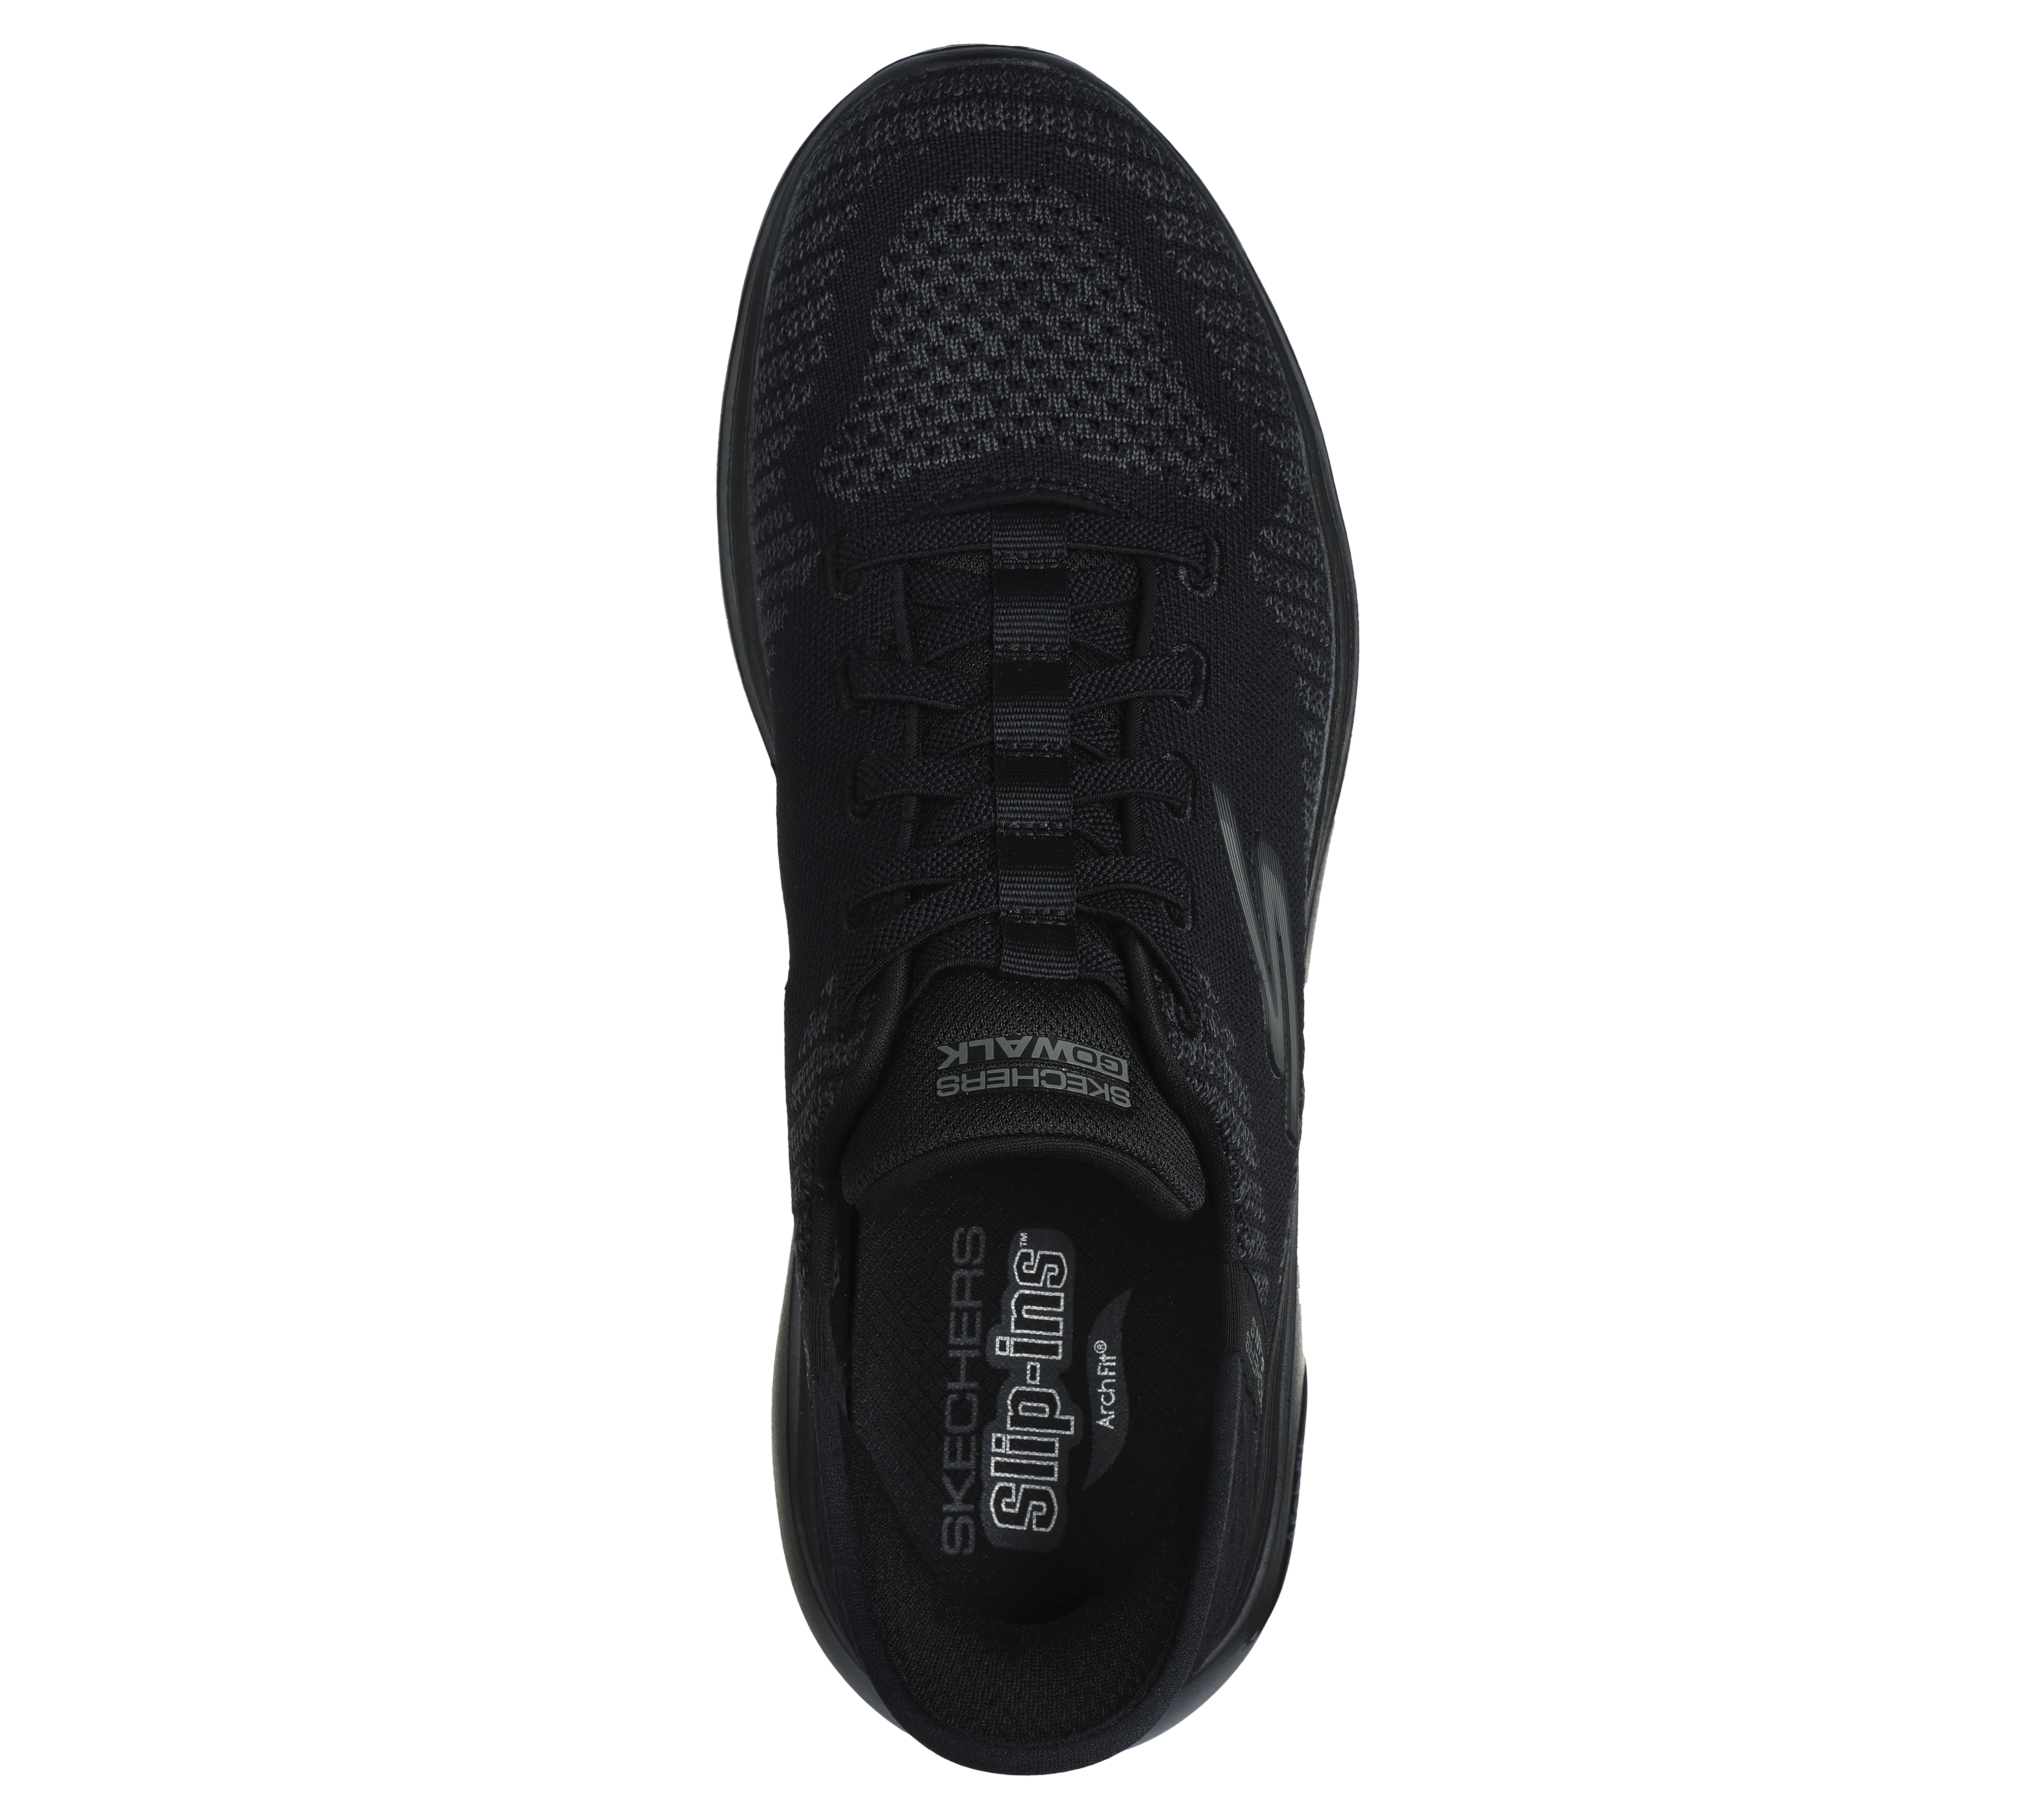 Skechers Slip-ins: Arch Fit 2.0 - Grand Select 2 | SKECHERS